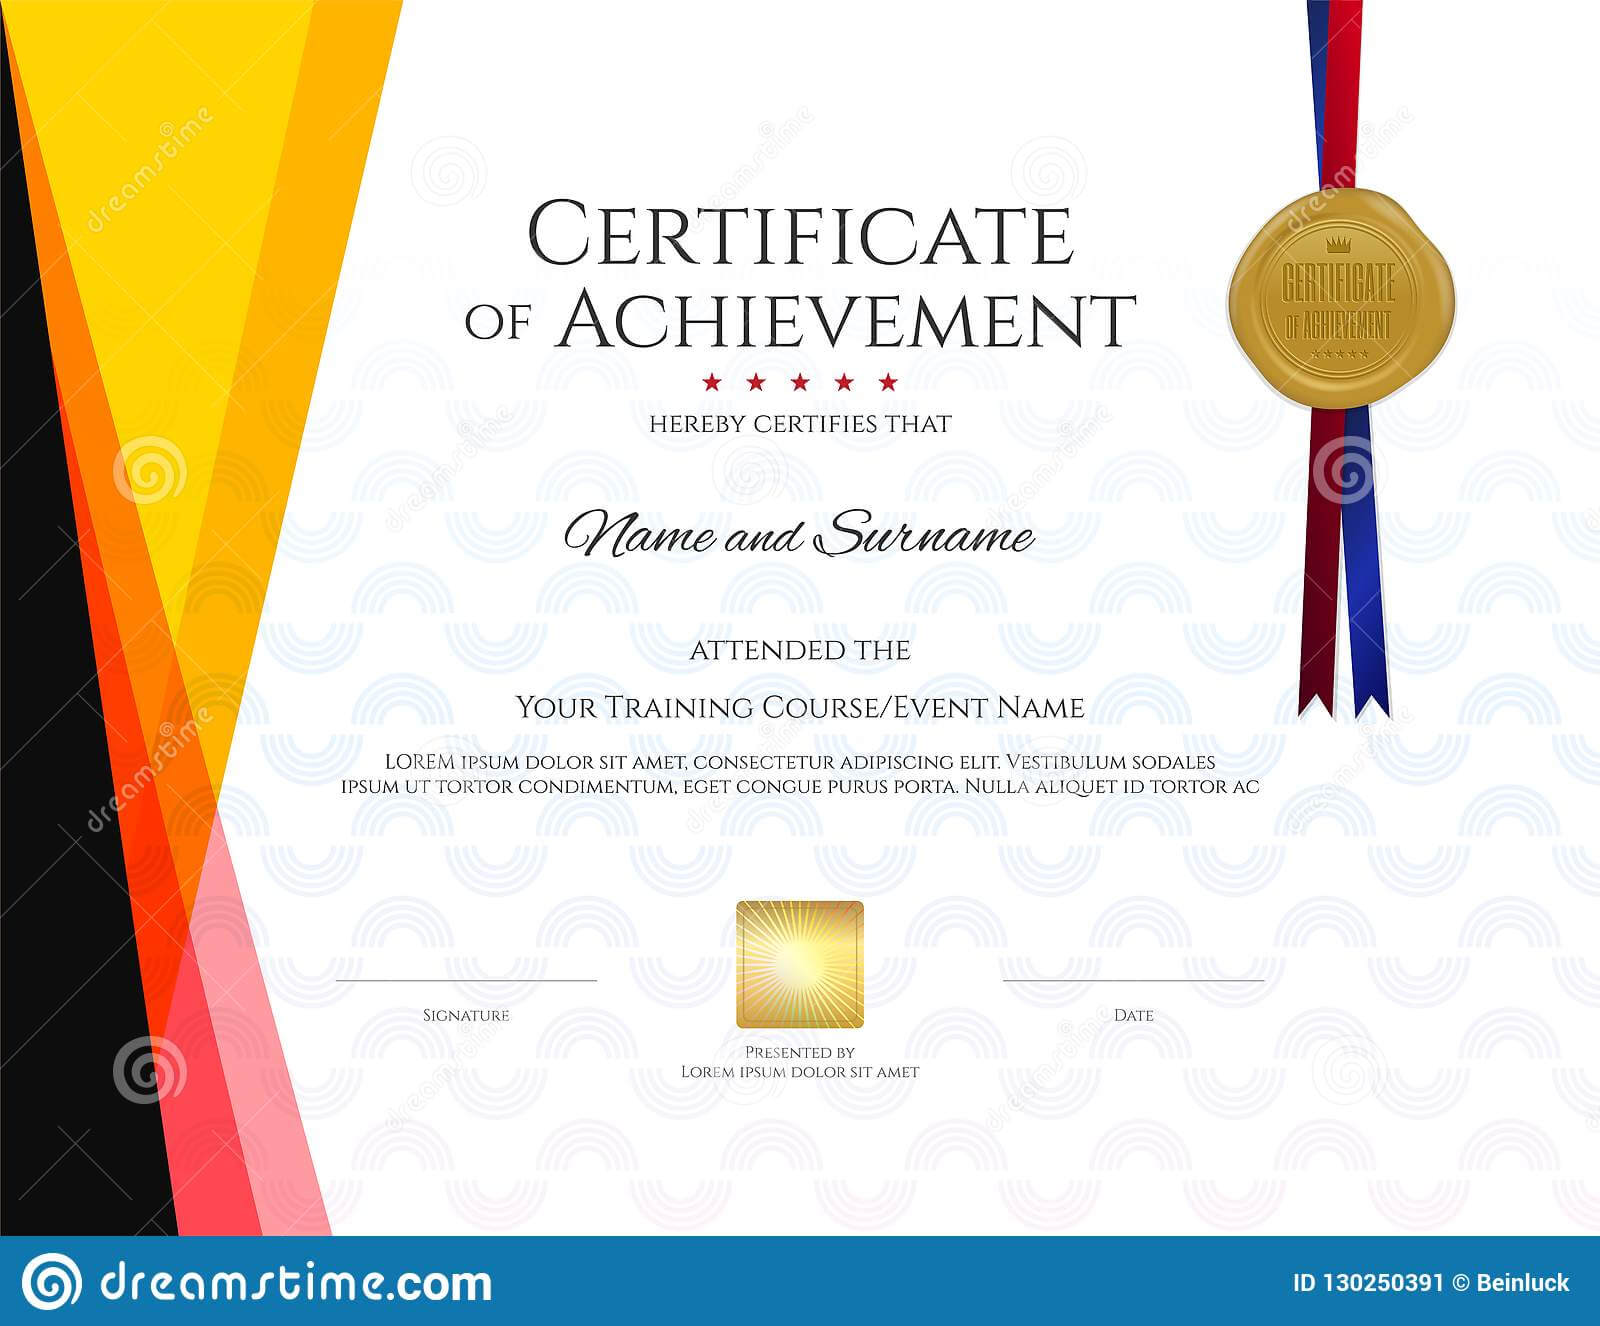 Modern Certificate Template With Elegant Border Frame Pertaining To Christian Certificate Template